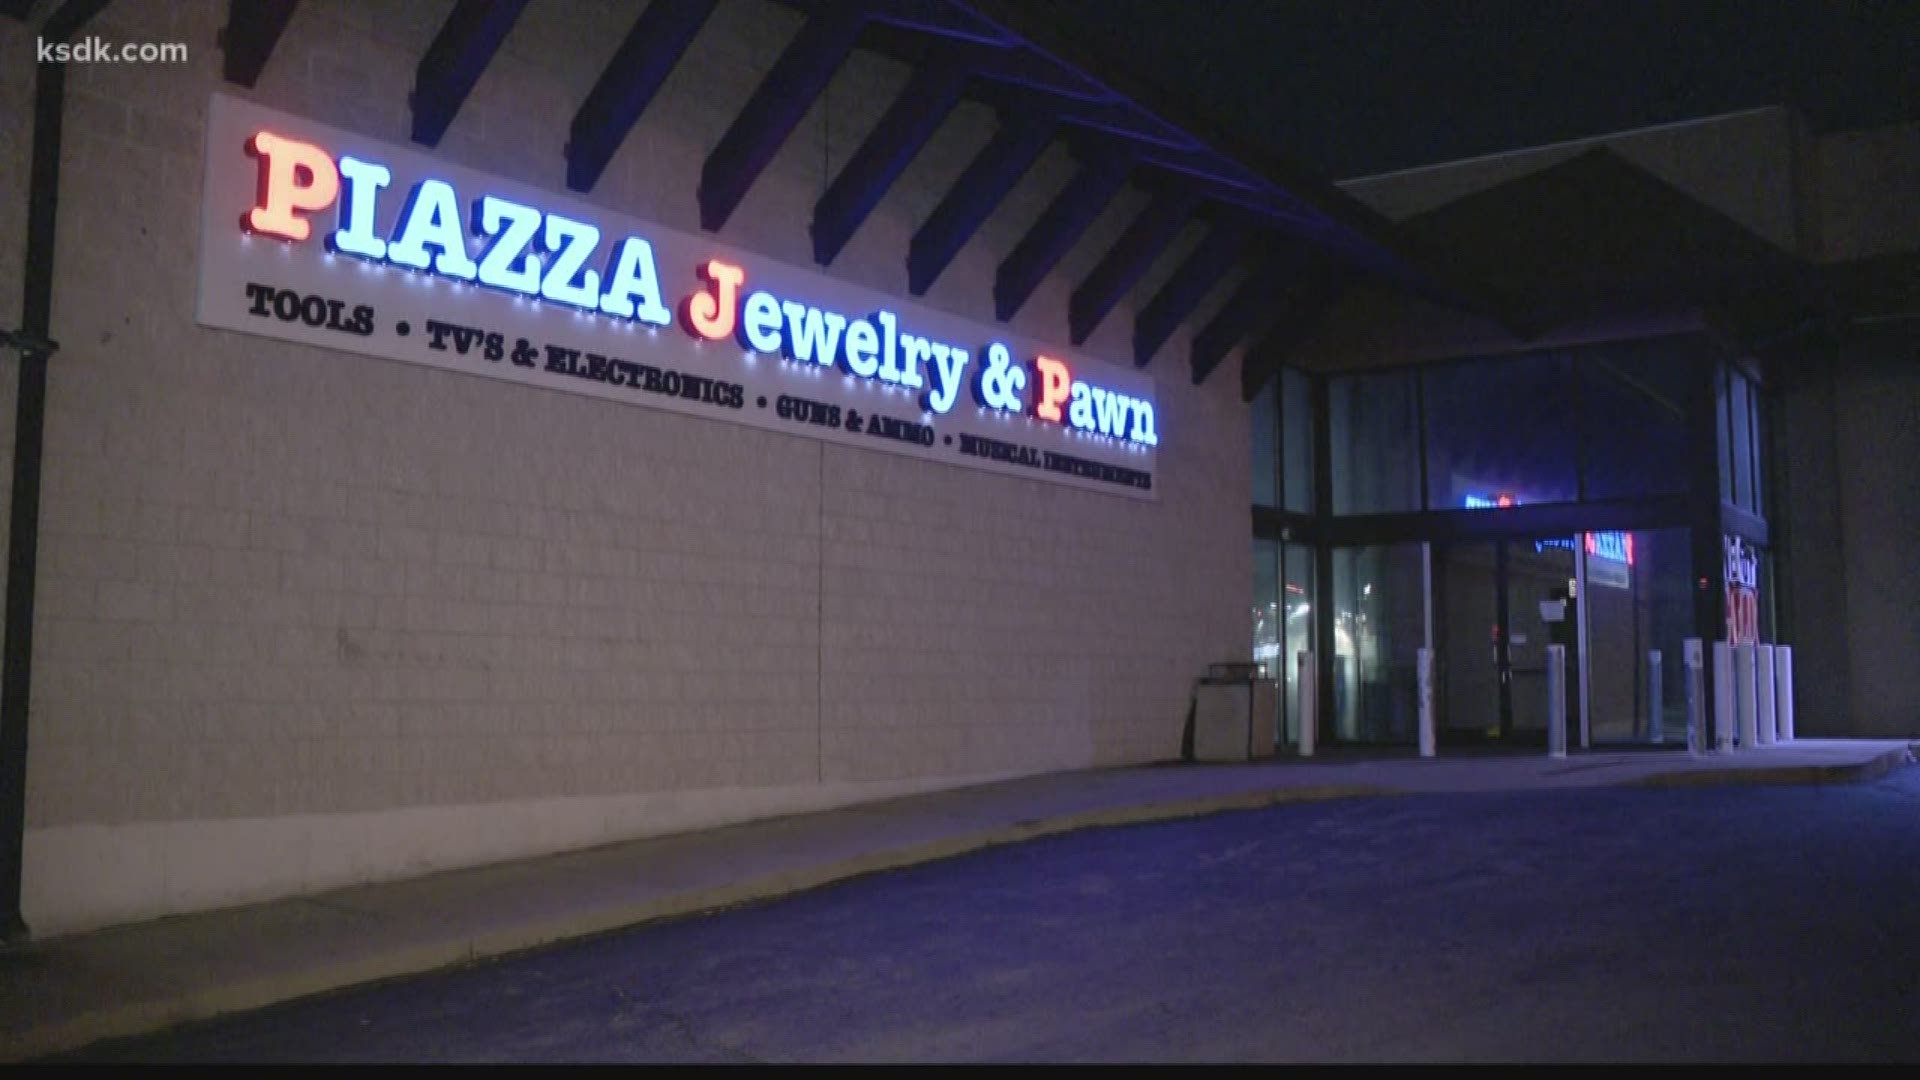 Federal agents say a large number of weapons used to commit violent crimes in St. Louis last year, were bought at Piazza Jewelry and Pawn.